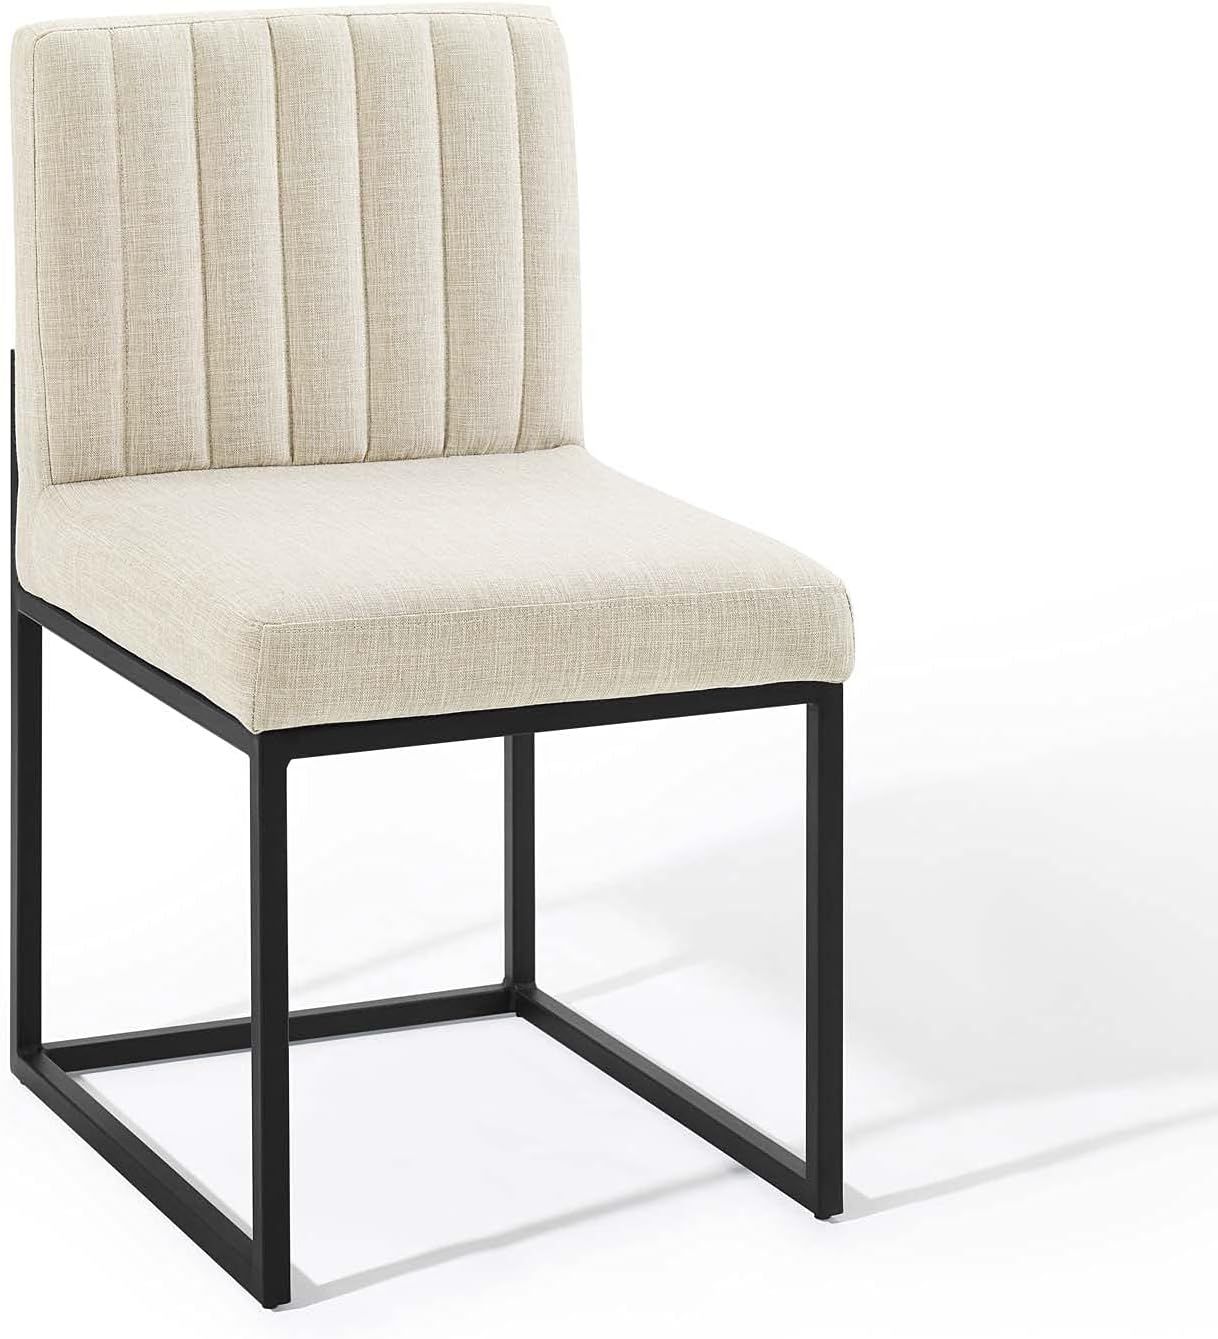 Modway Carriage Channel Tufted Sled Base Upholstered Fabric Dining Chair, Black Beige | Amazon (US)